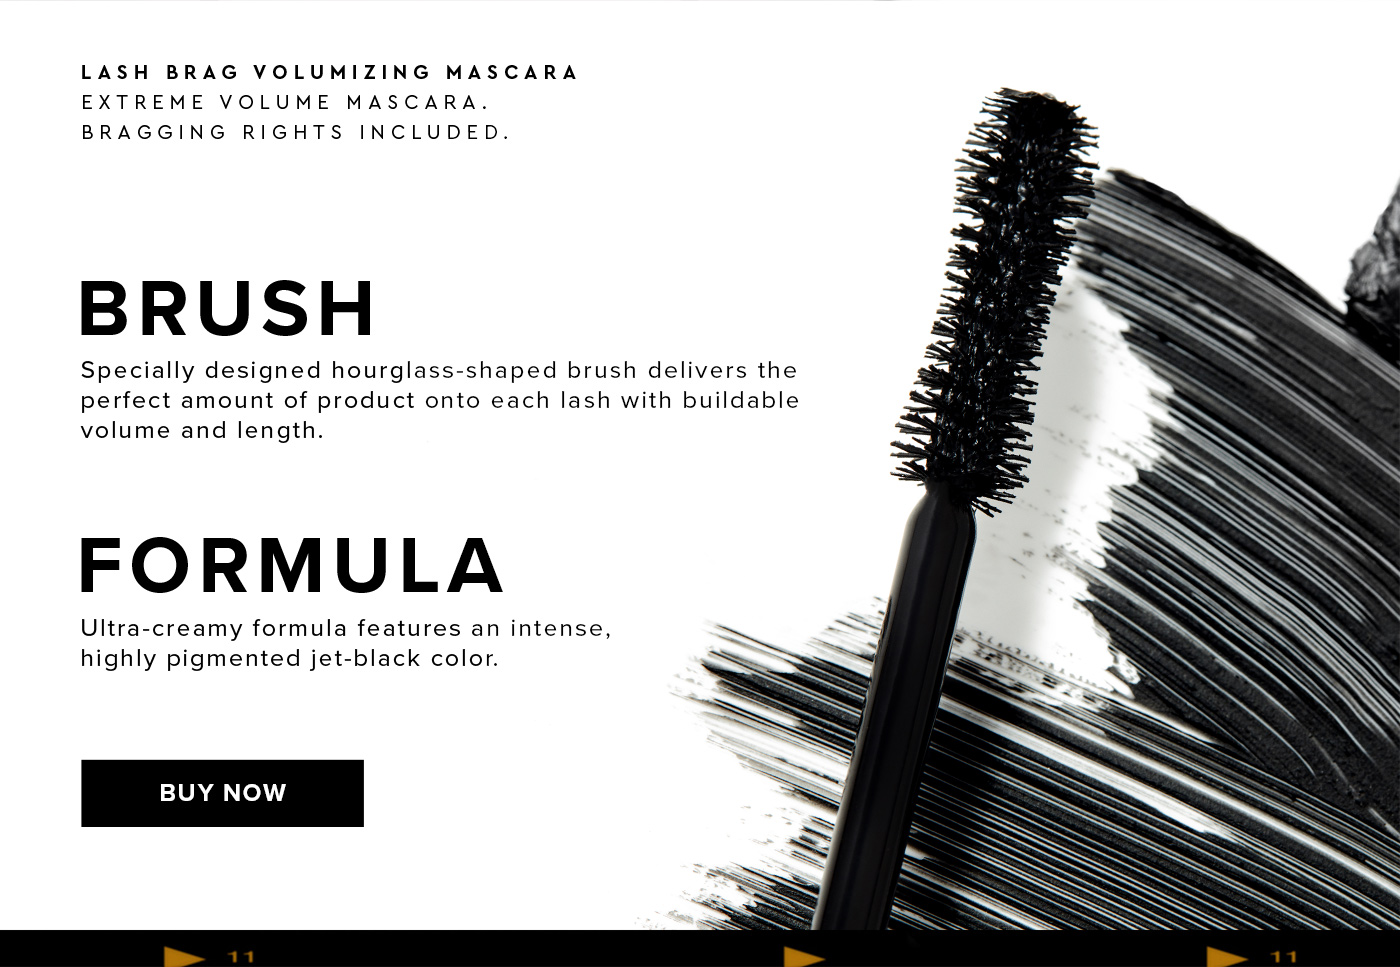 LASH BRAG VOLUMIZING MASCARA EXTREME VOLUME MASCARA. BRAGGING RIGHTS INCLUDED. BRUSH Specially designed hourglass-shaped brush delivers the perfect amount of product onto each lash with buildable volume and length. FORMULA Ultra-creamy formula features an intense, highly pigmented jet-black color. BUY NOW.